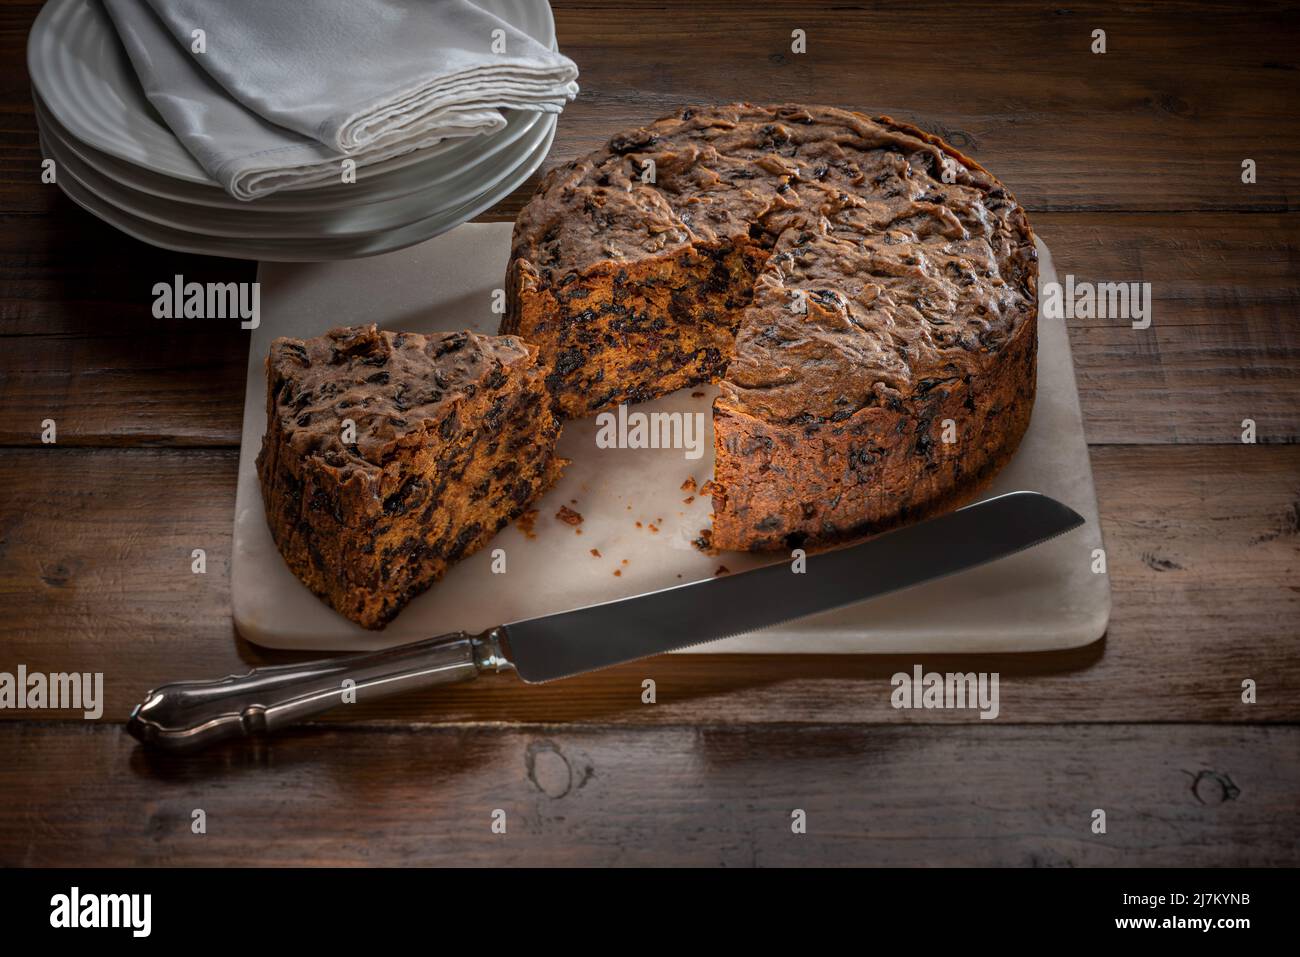 Fruit cake served on a marble board with a segment cut out, on a dark wood work top, with a stack of white plates and napkins in the background. Stock Photo